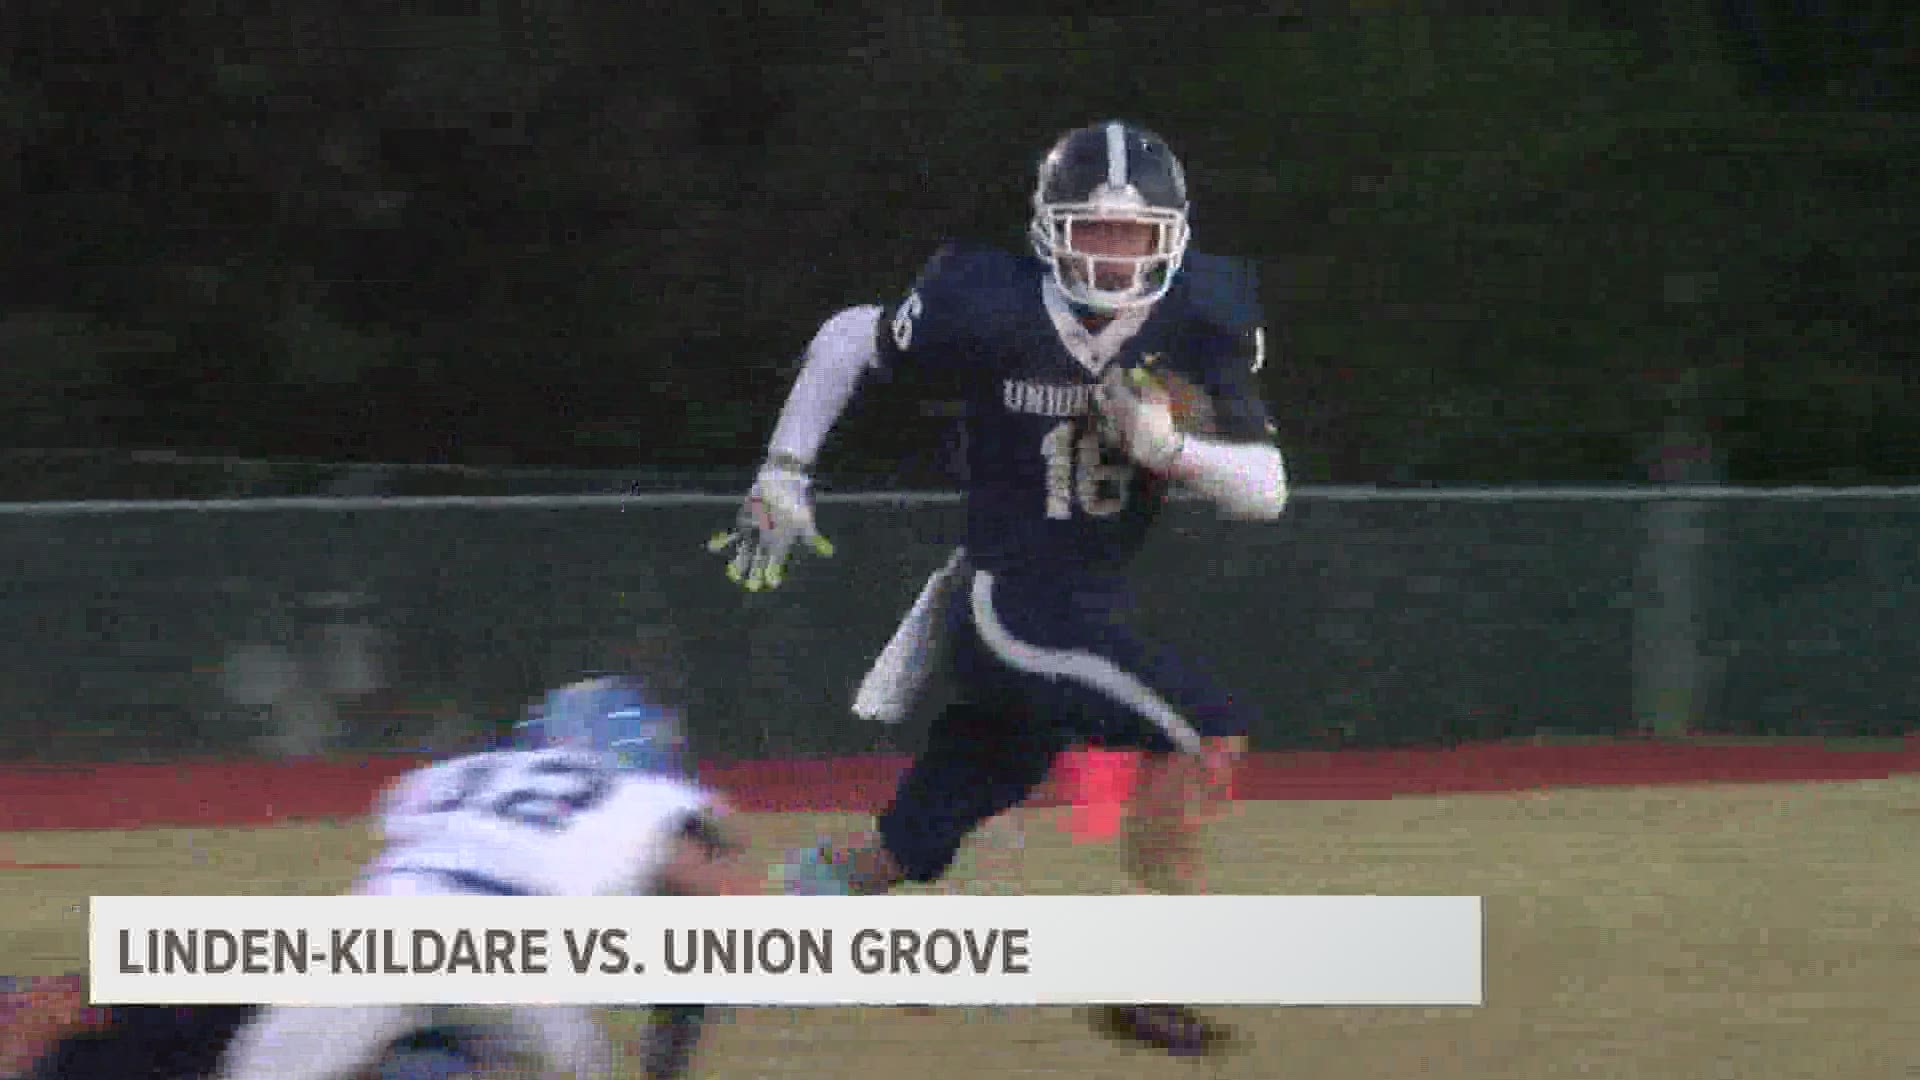 Linden-Kildare defeated Union Grove by a score of 40-30.